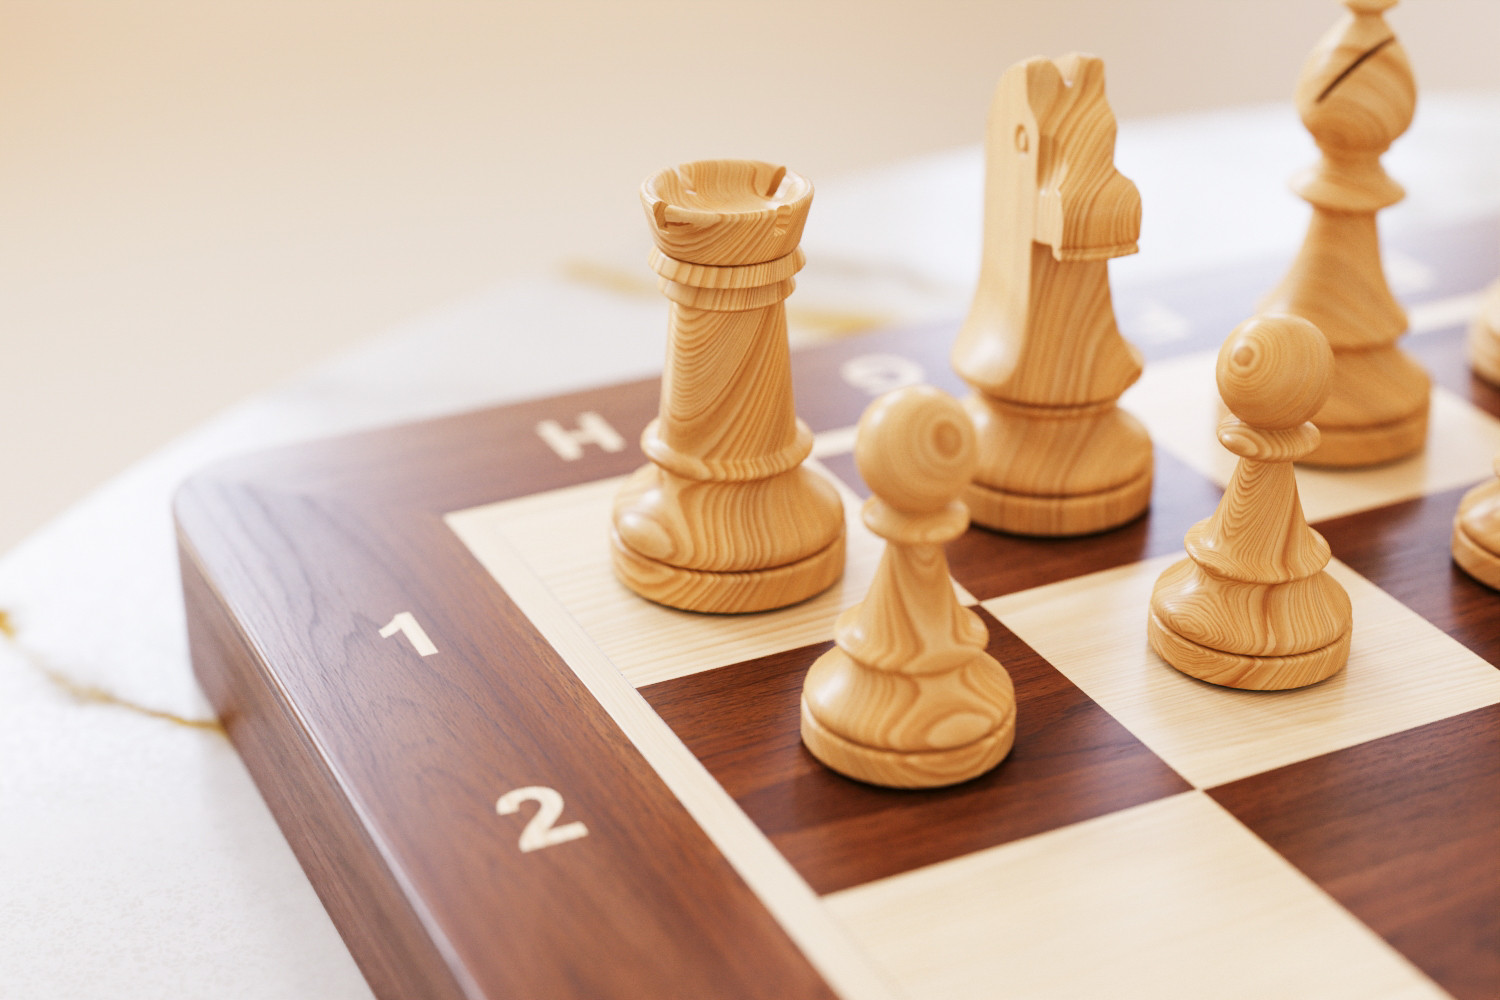 Classic wooden chess board 3D model